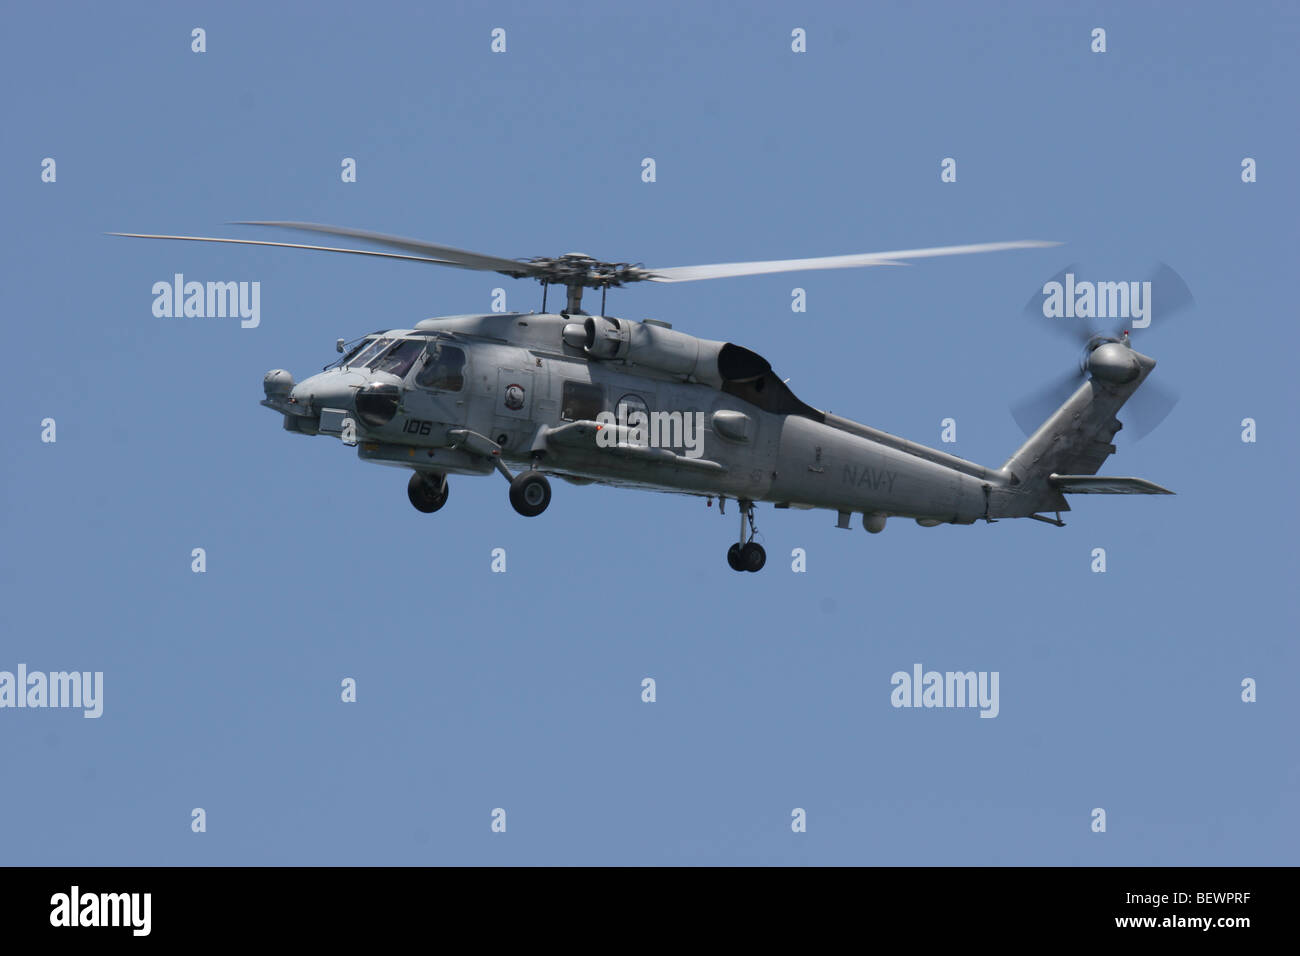 An SH-60 helicopter flown by the United States Navy Stock Photo